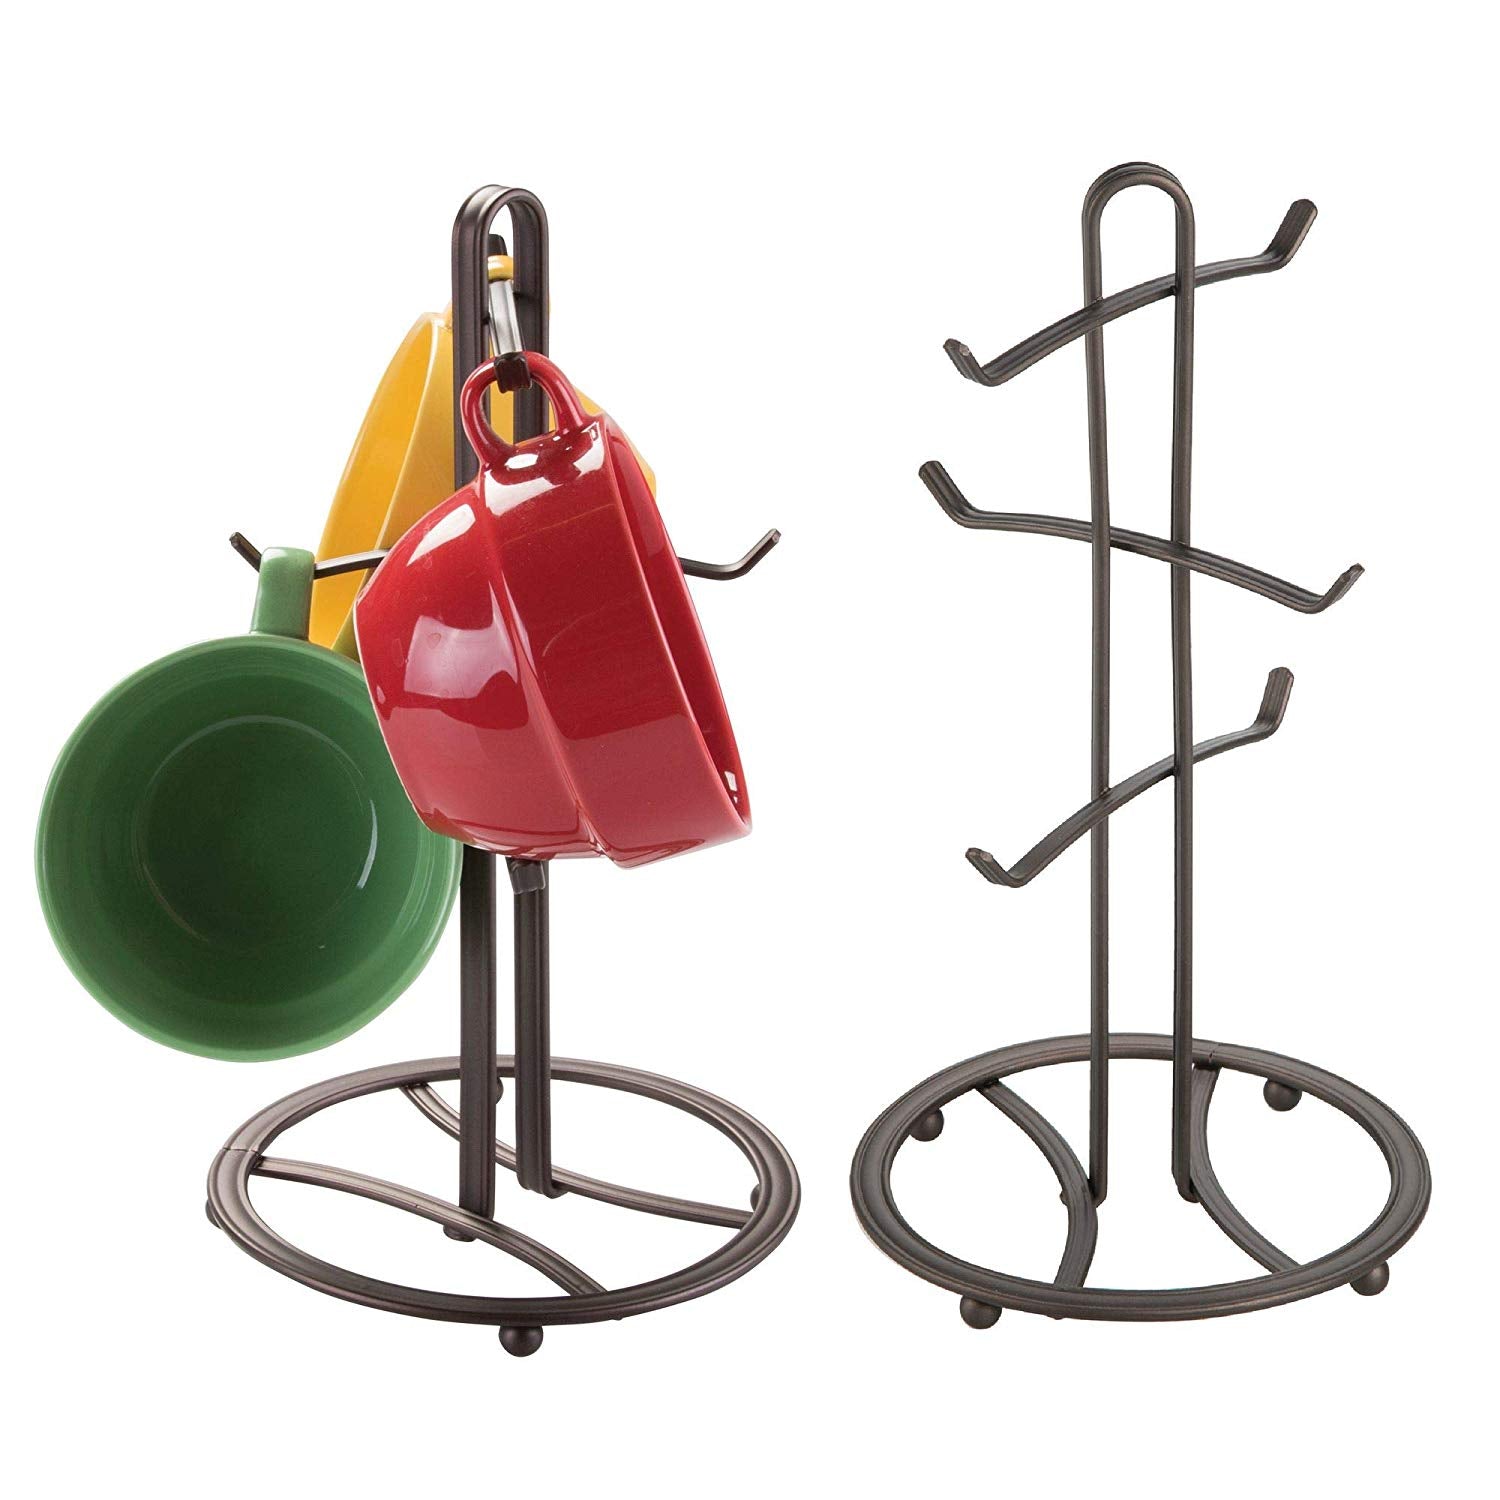 mDesign Decorative Kitchen Countertop Mug Rack Holder Stand for Hanging Coffee Mugs, Tea Cups - Freestanding Compact Mug Tree with 6 Hooks - Pack of 2, Steel Wire in Bronze Finish